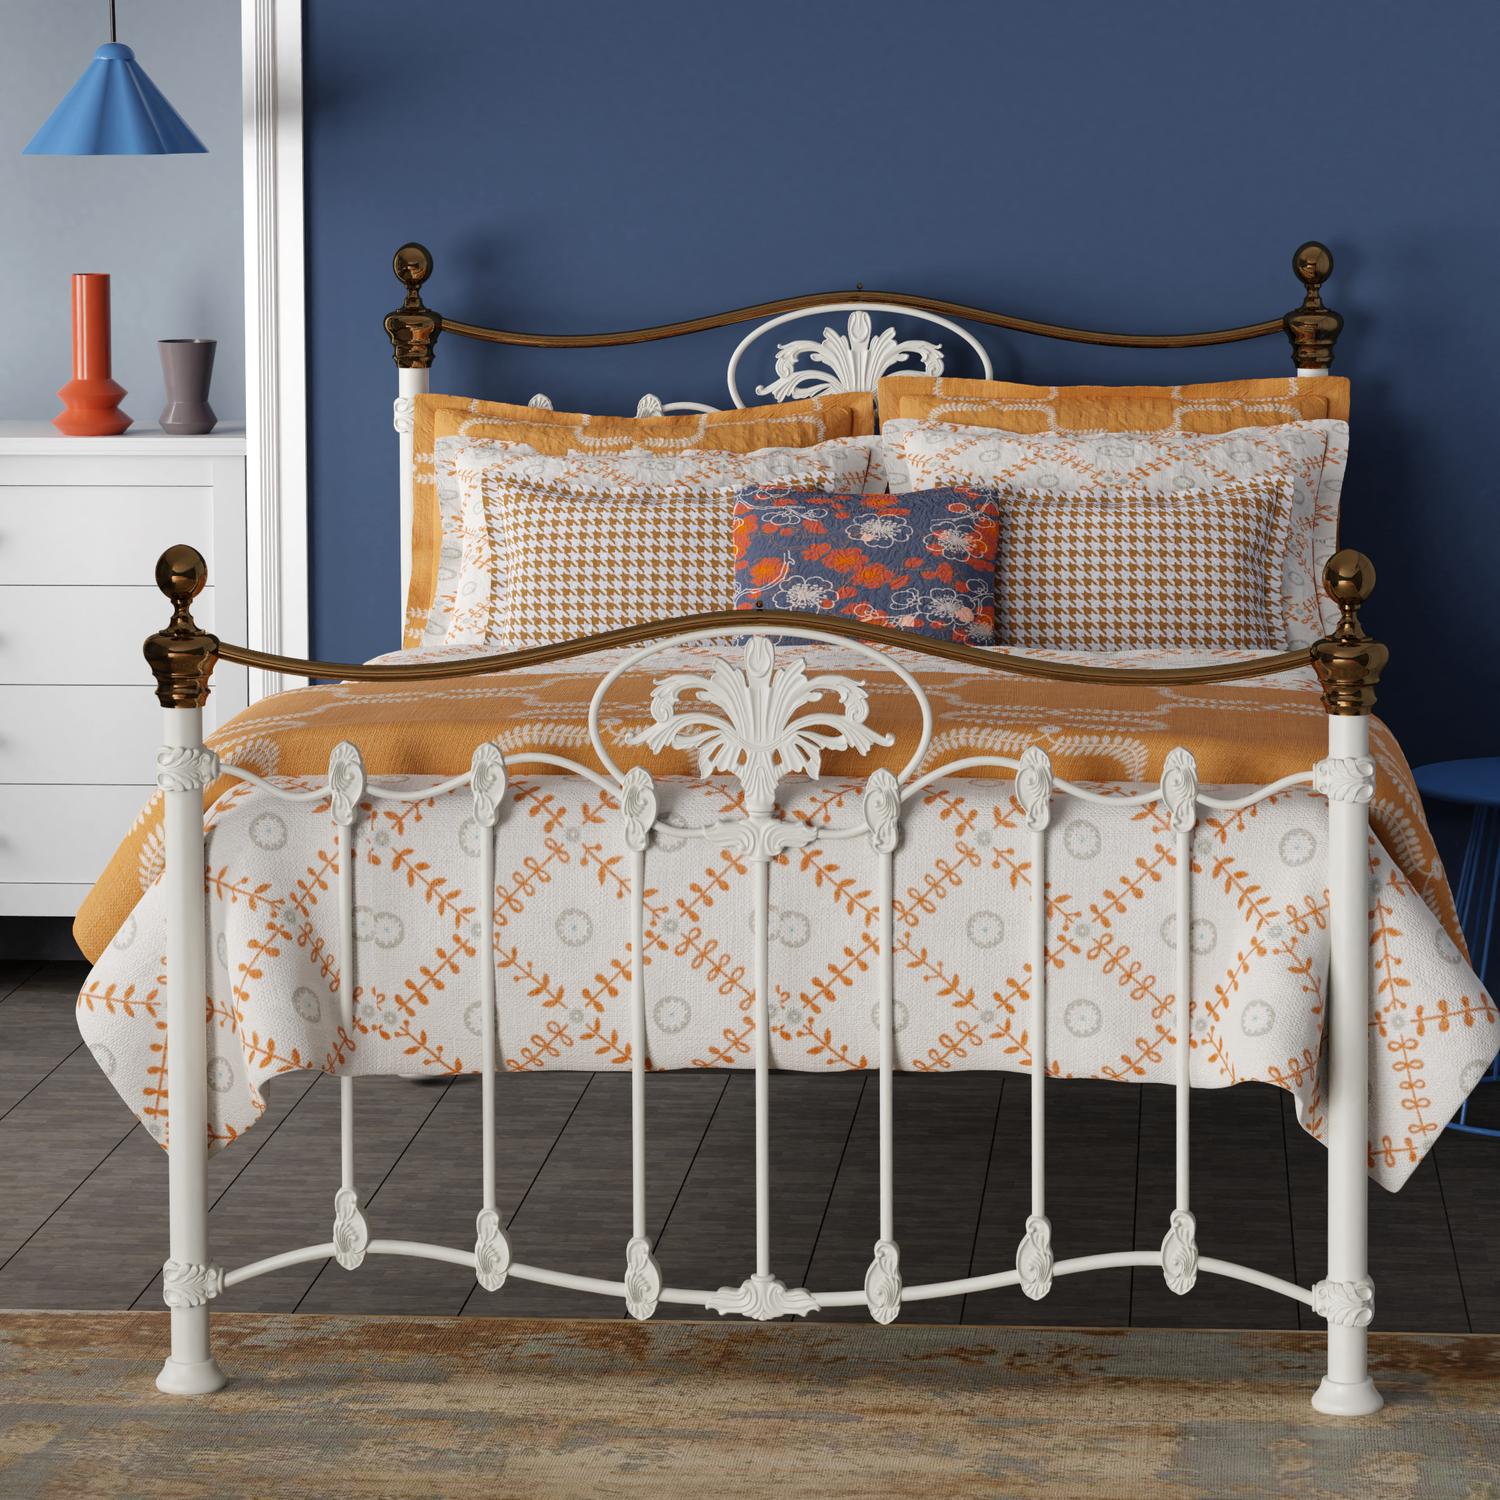 Camolin iron bed - Image blue and white